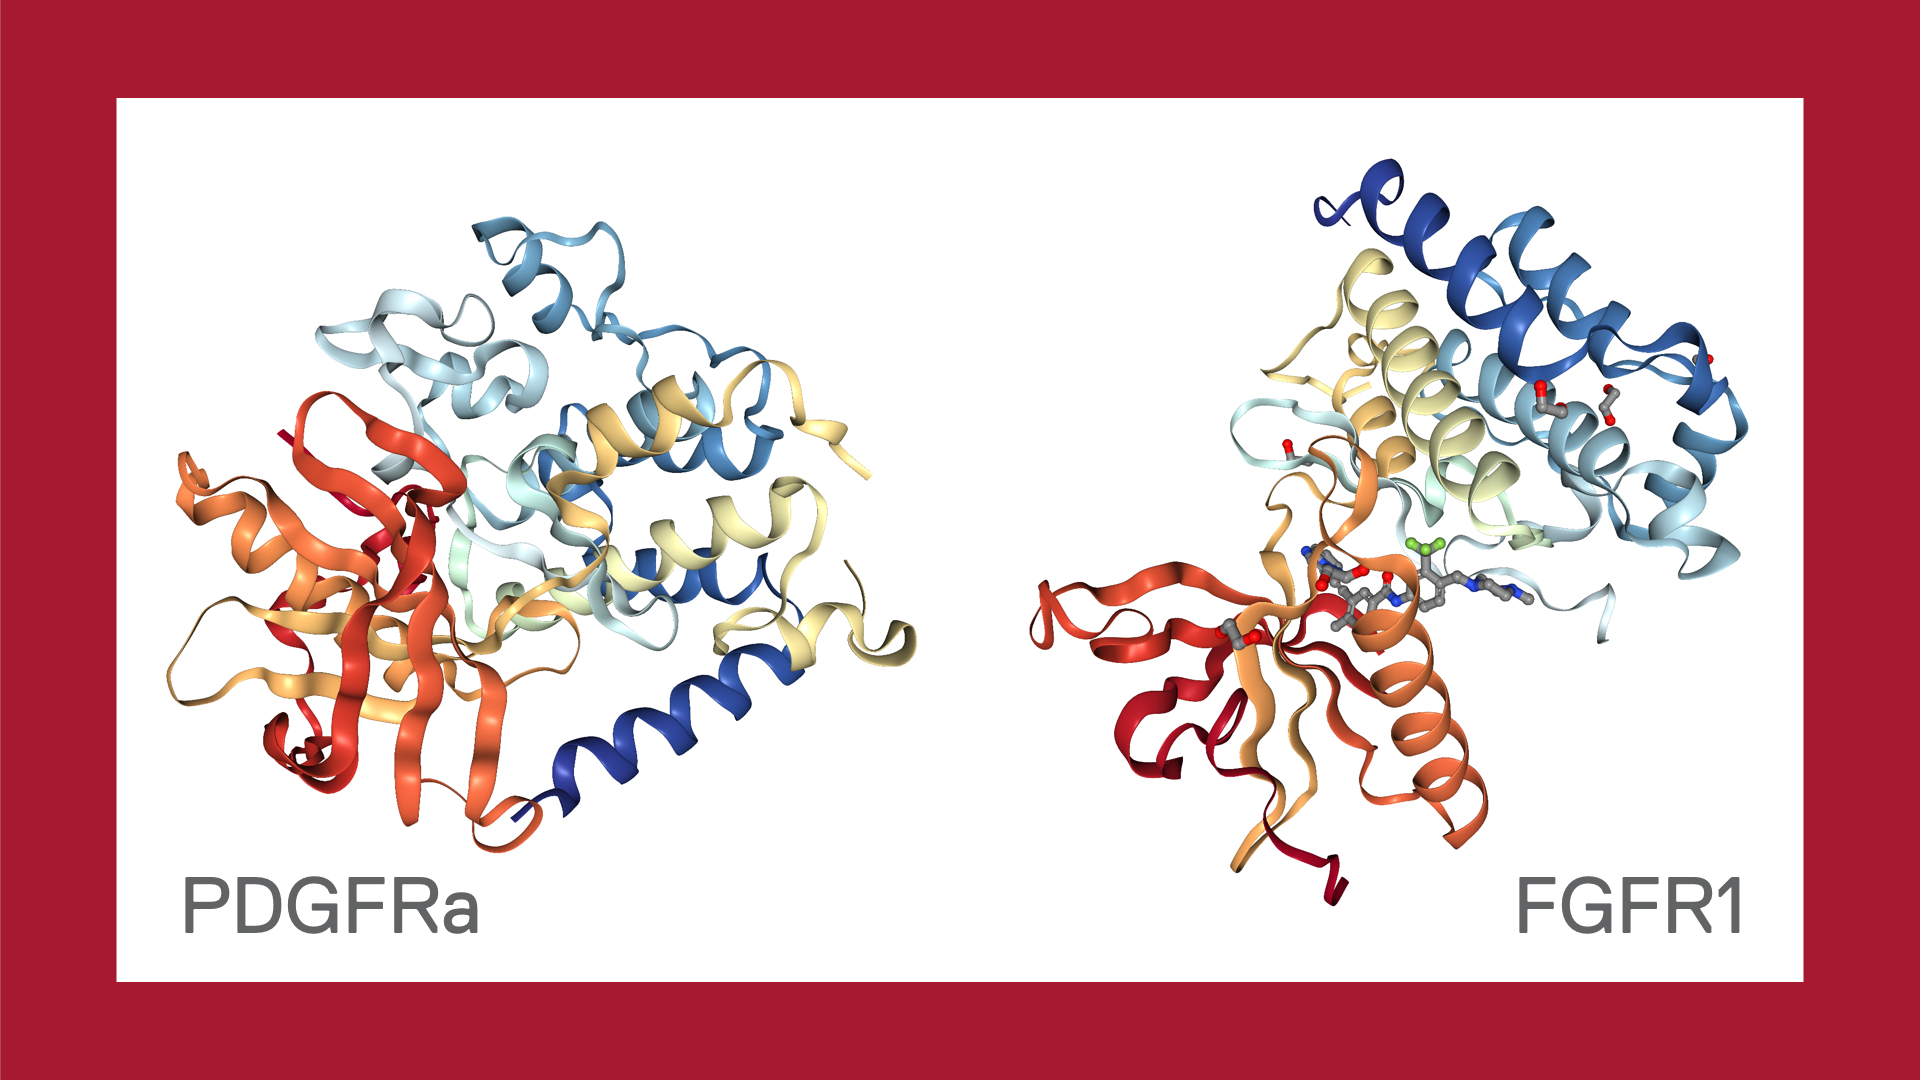 Structures of PDGFRa and FGFR1 proteins